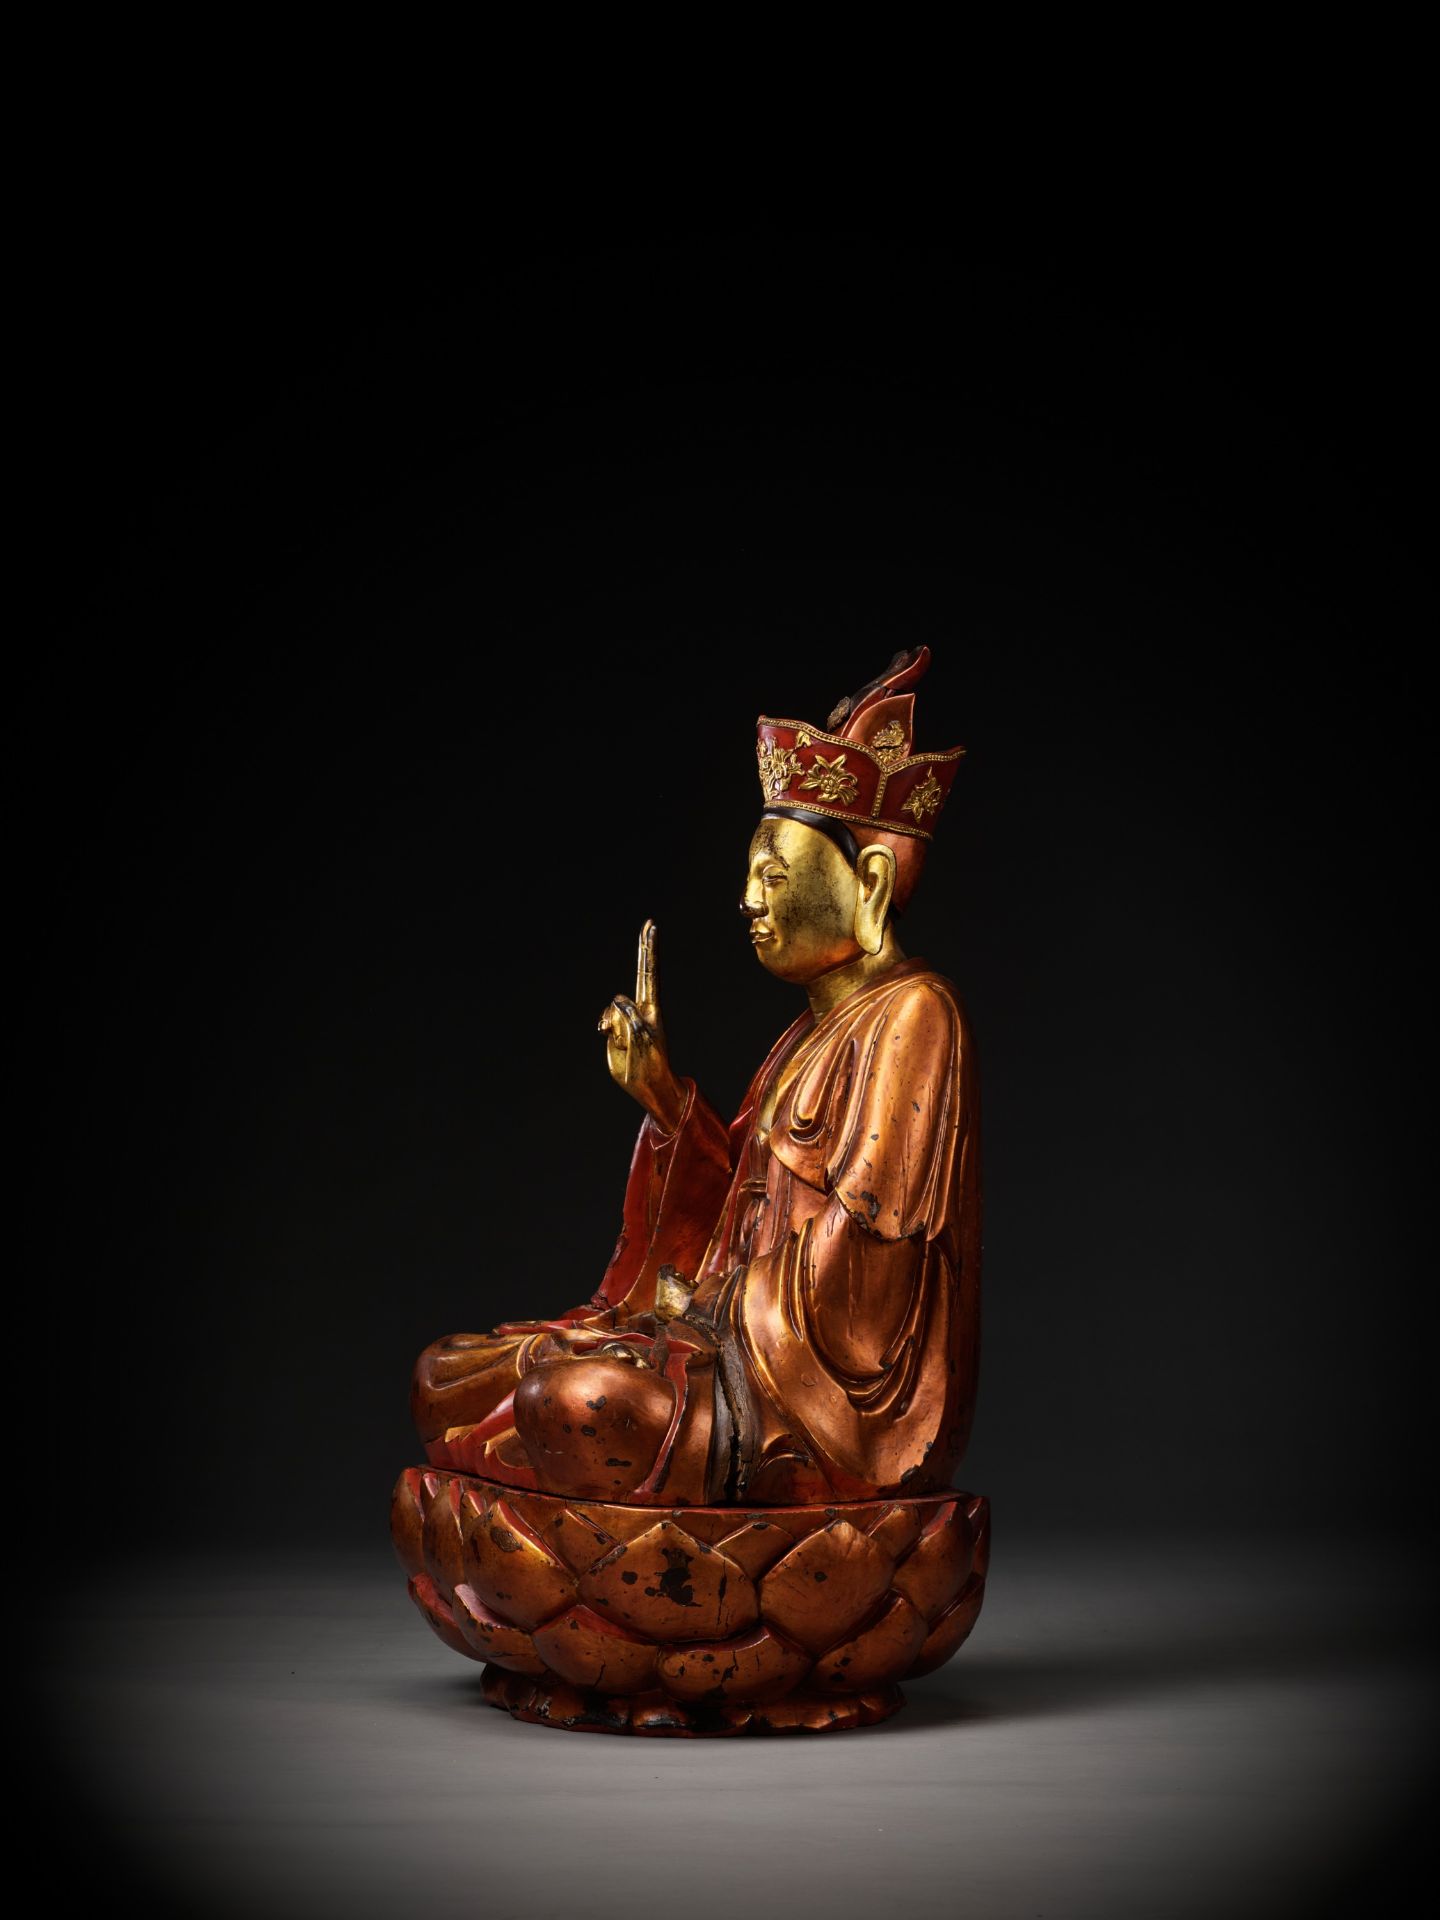 A LARGE GILT-LACQUERED WOOD FIGURE OF A BODHISATTVA, VIETNAM, 17TH-18TH CENTURY - Image 7 of 14